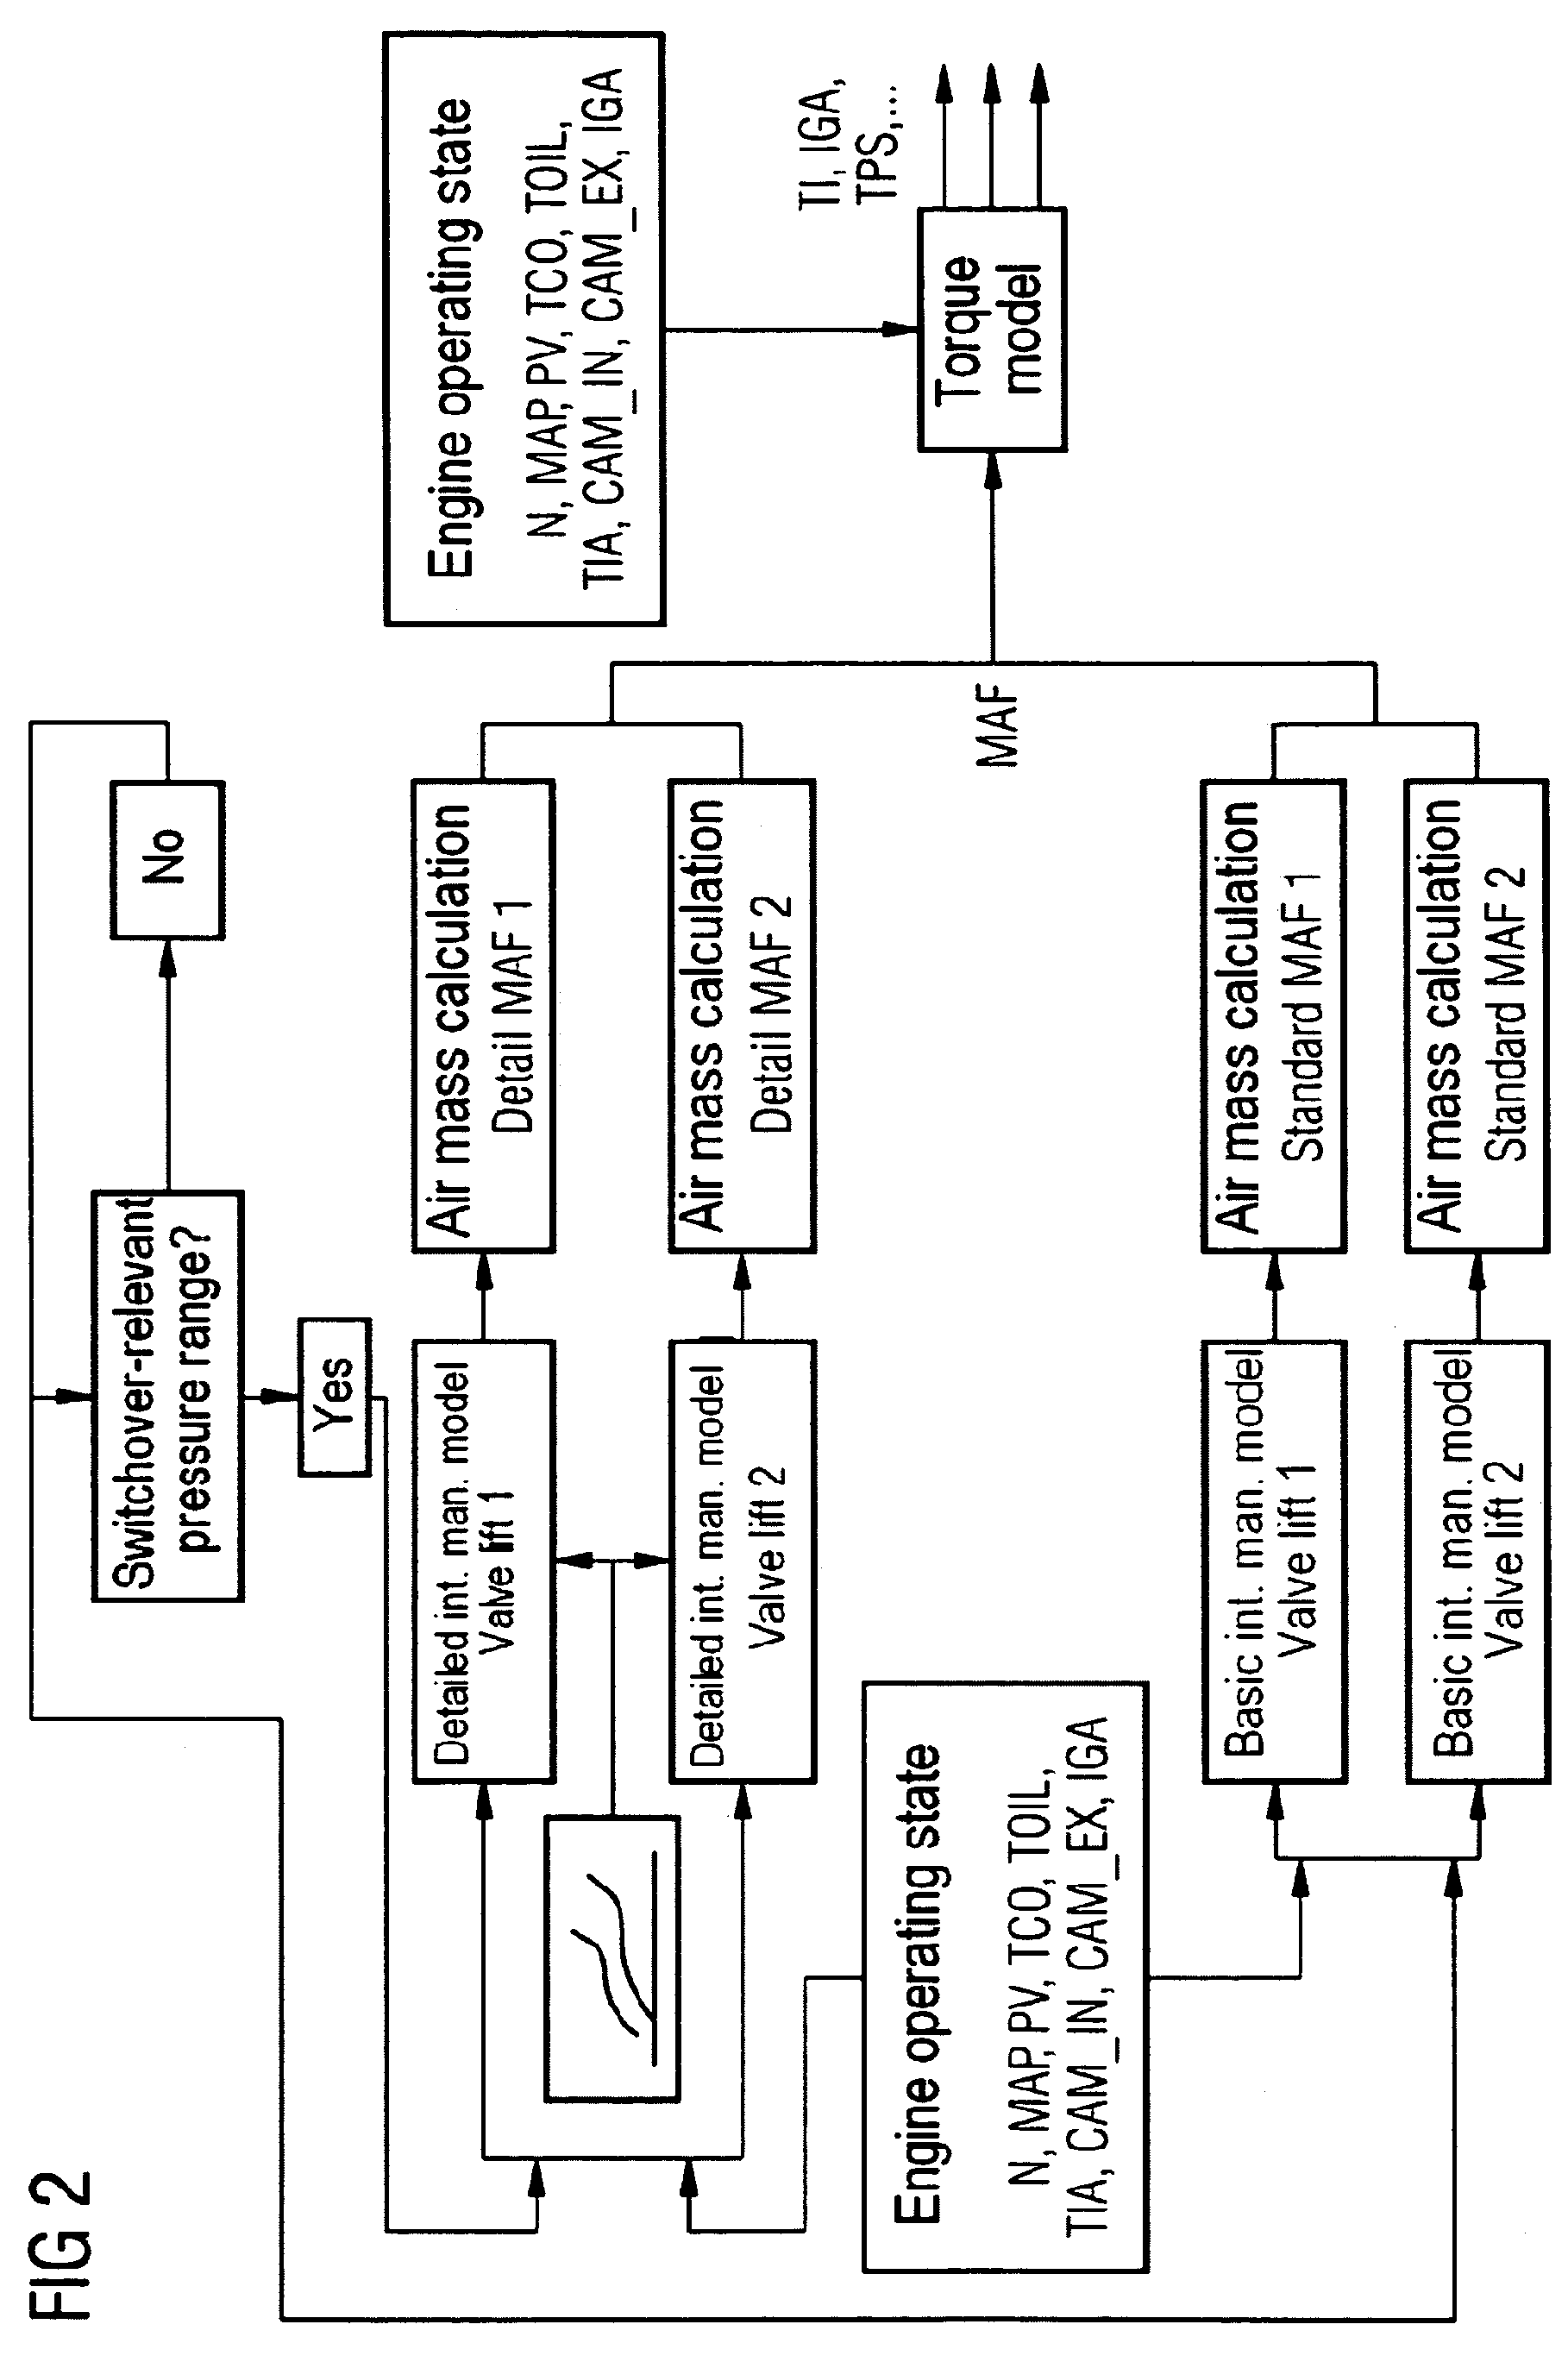 Method for controlling an internal combustion engine using valve lift switchover